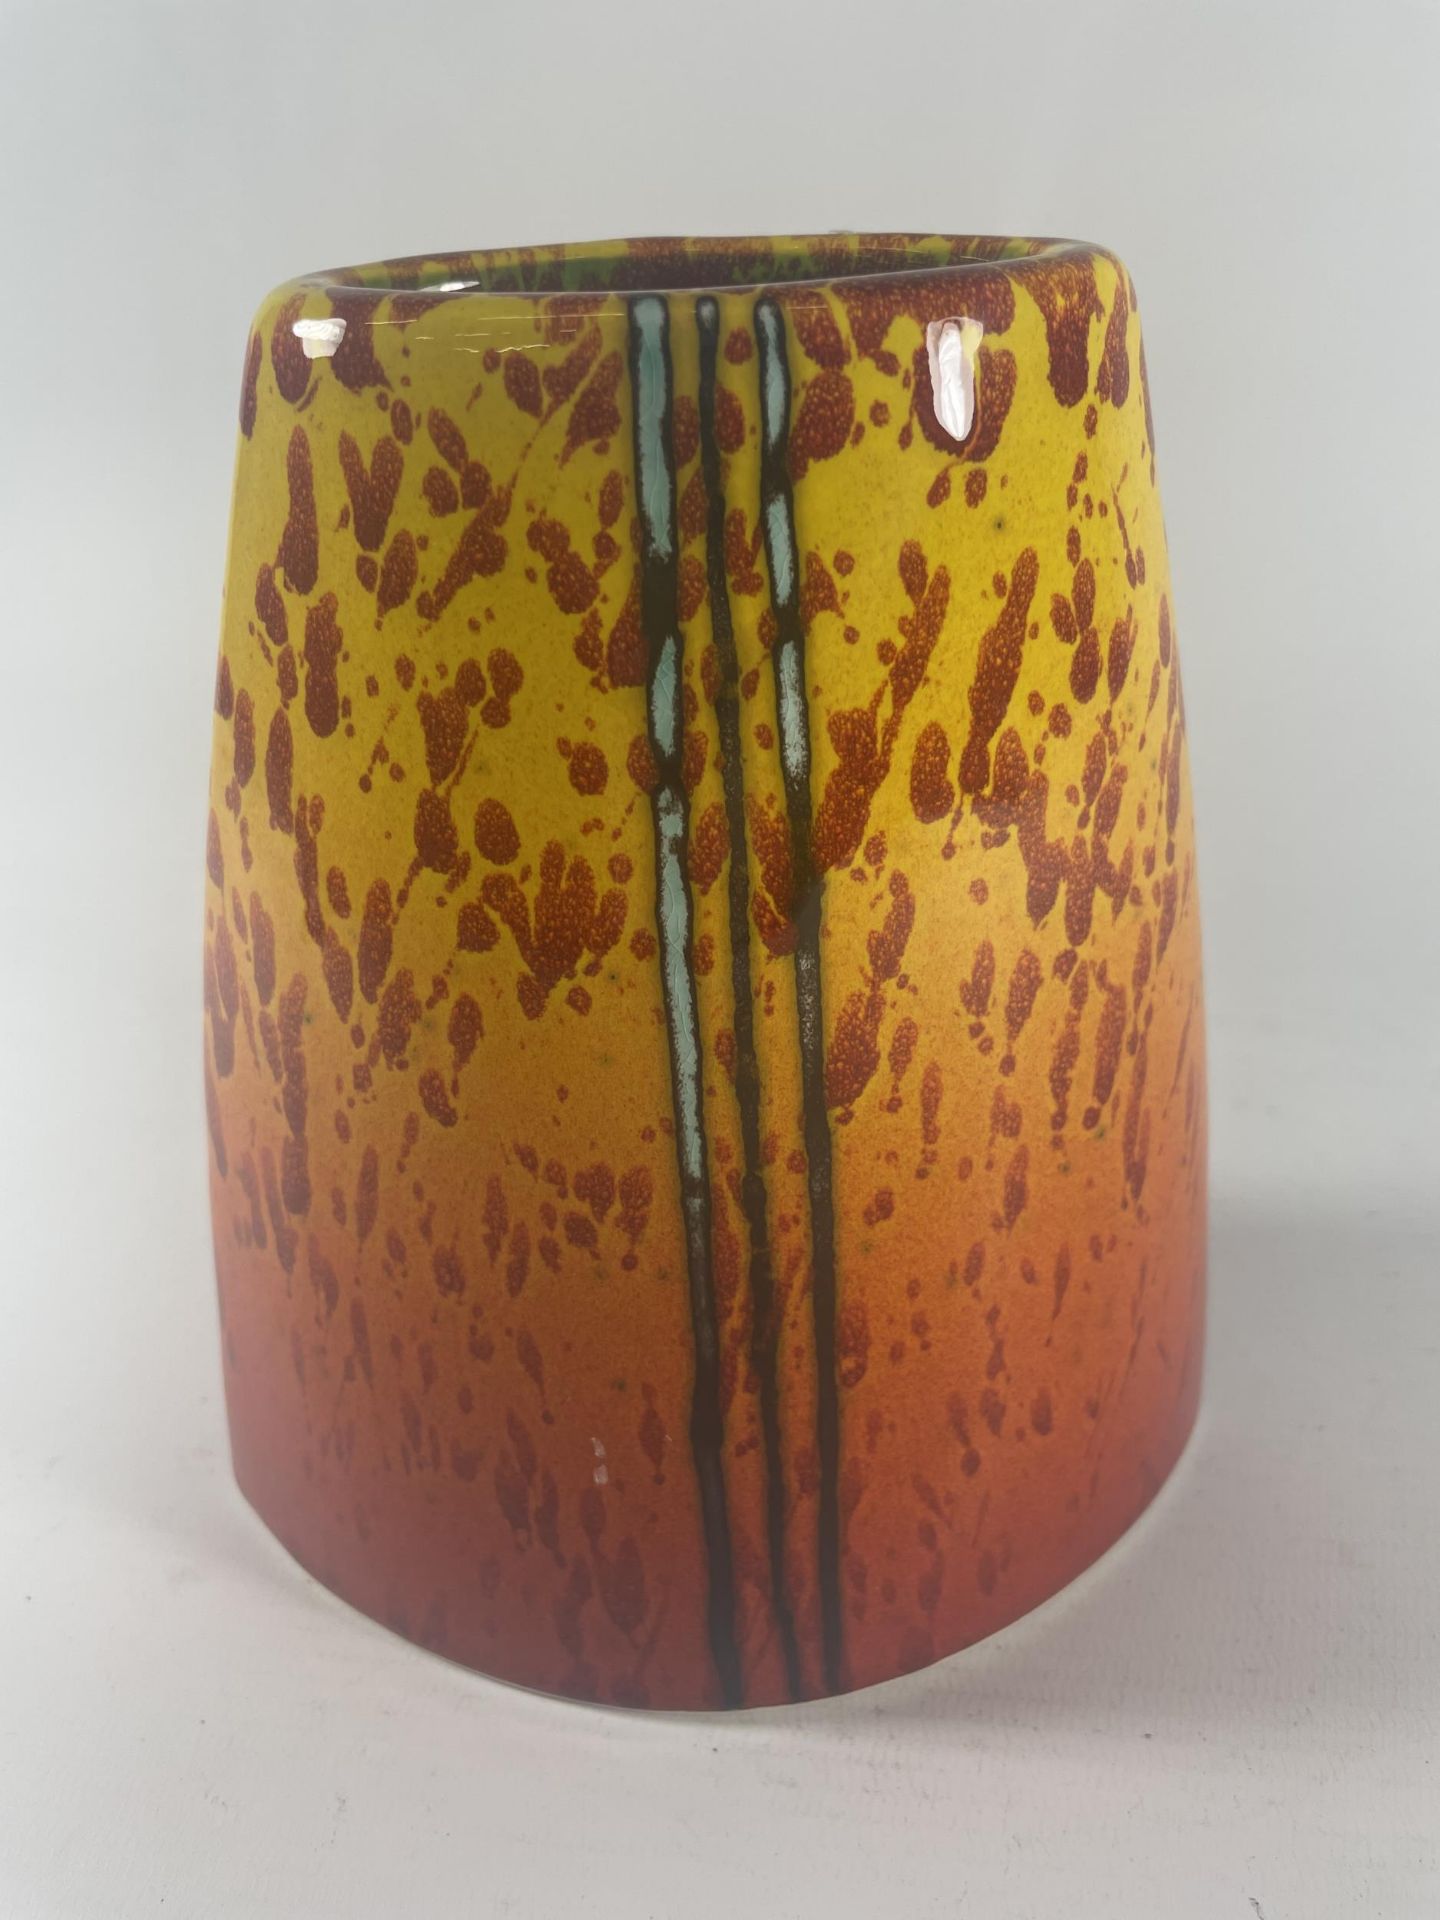 AN ANITA HARRIS HAND PAINTED AND SIGNED BRIMSTONE VASE